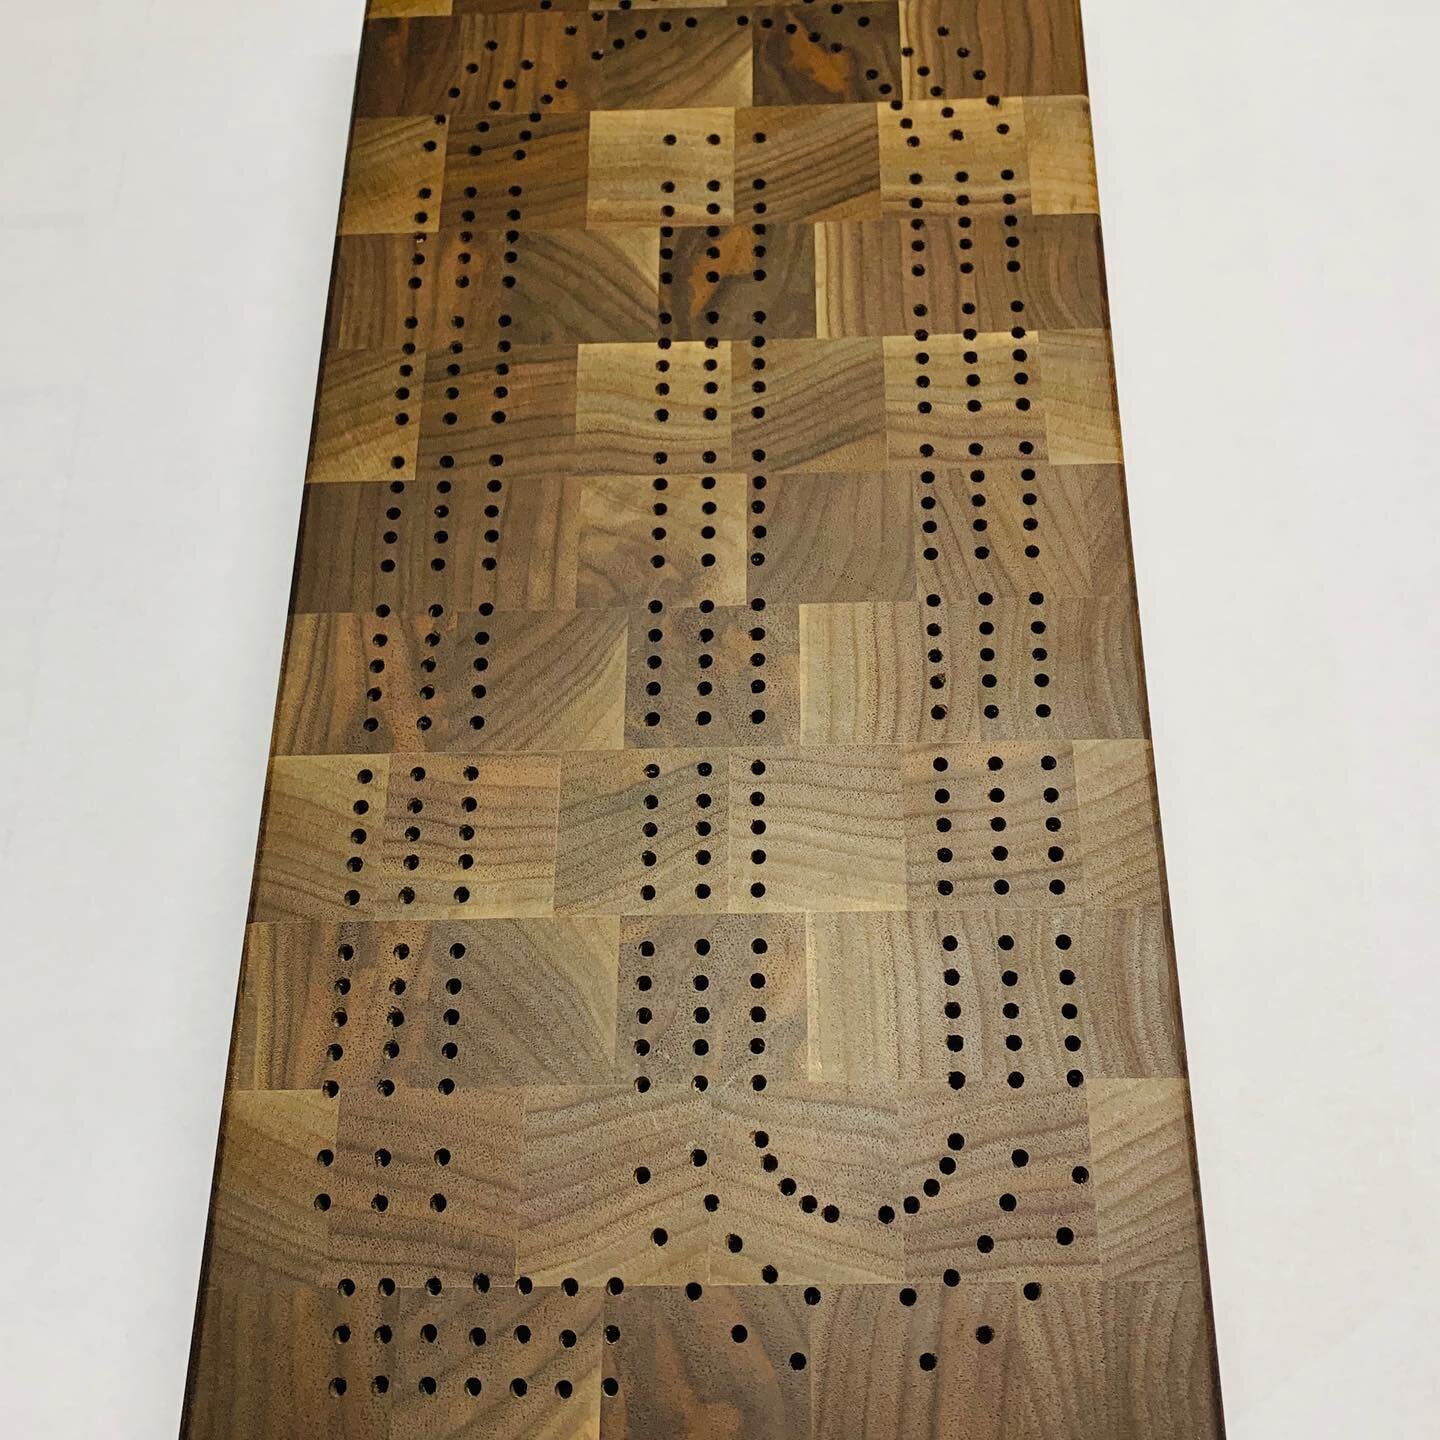 2&rdquo;x 8&rdquo;x 16&rdquo; End grain Walnut cribbage board up for grabs! Put the cell phones down, strengthen your mind! Card and game pieces are stored underneath.#woodengames#builttolast#fuckyoucoronavirus